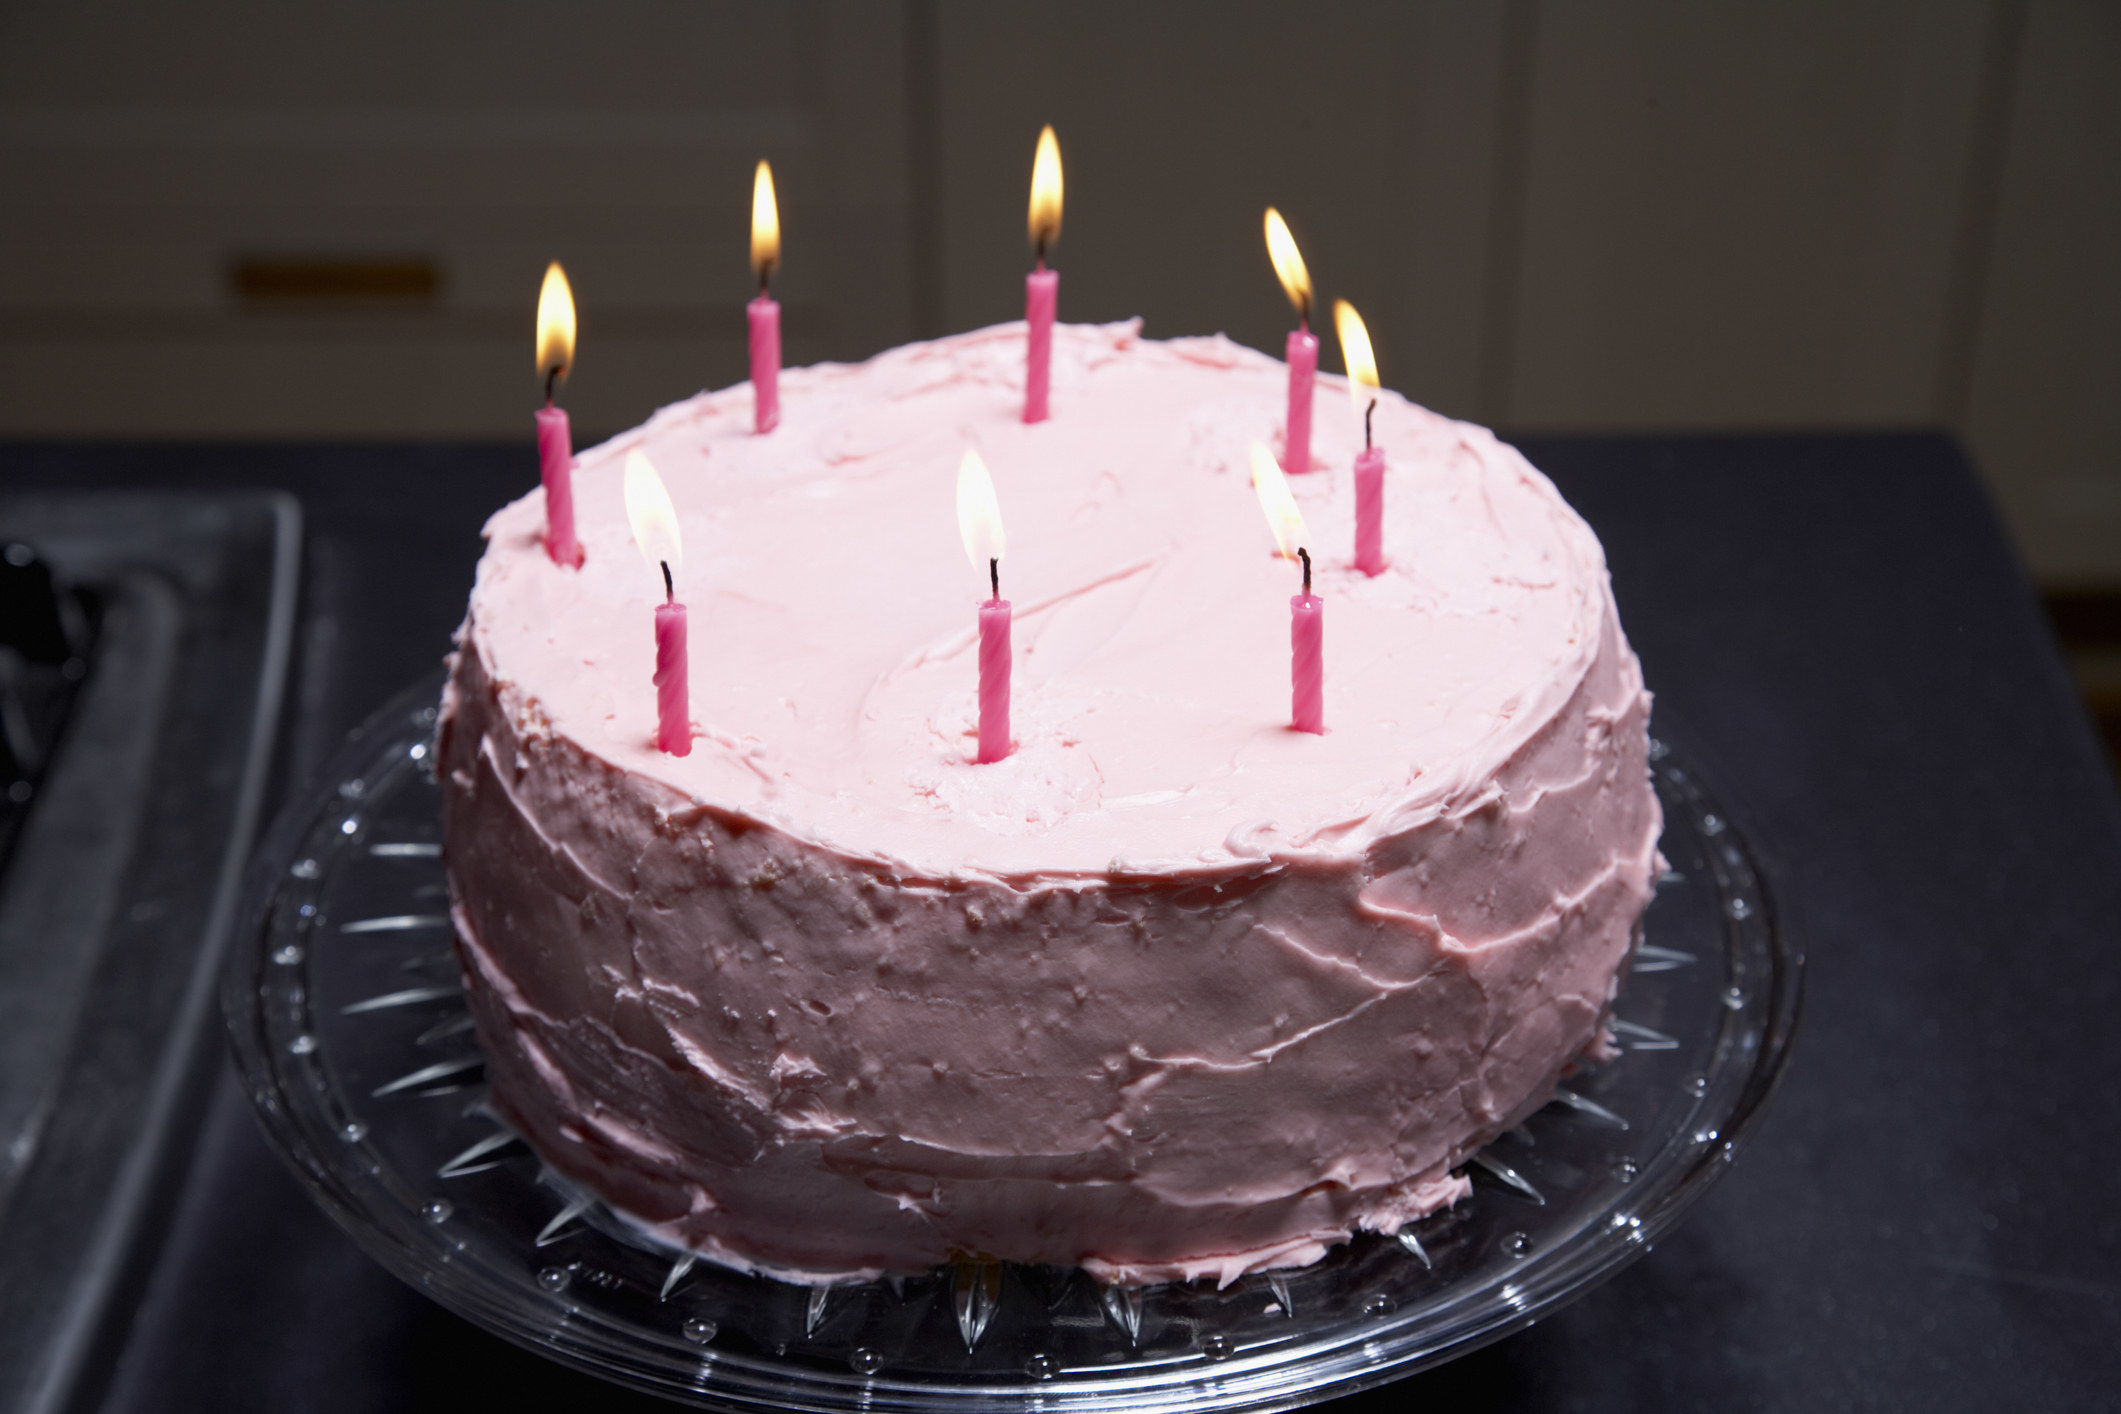 A cake with birthday candles in it.